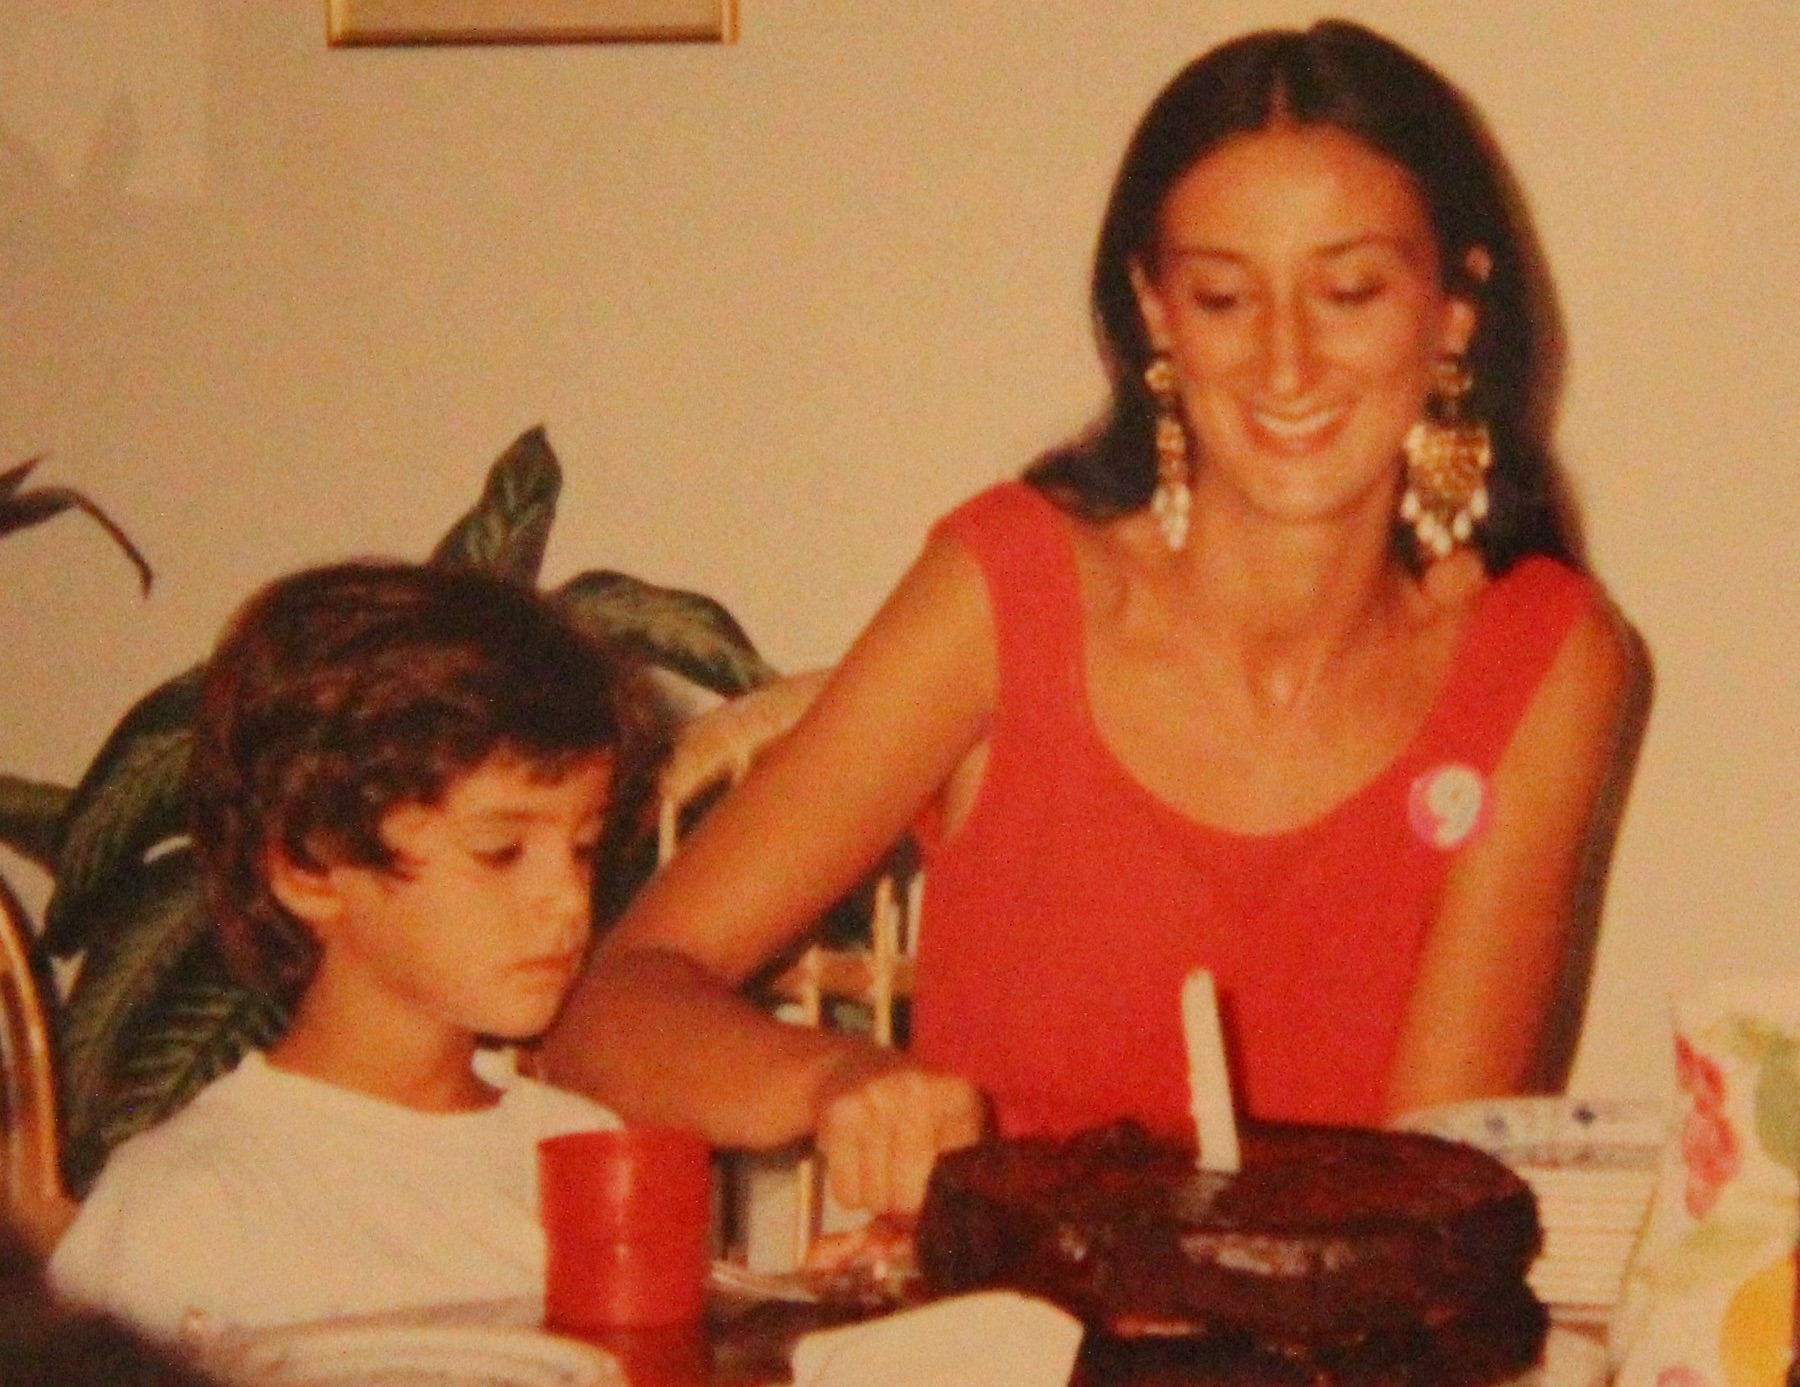 Daphne with her youngest son, Paul, on his ninth birthday.